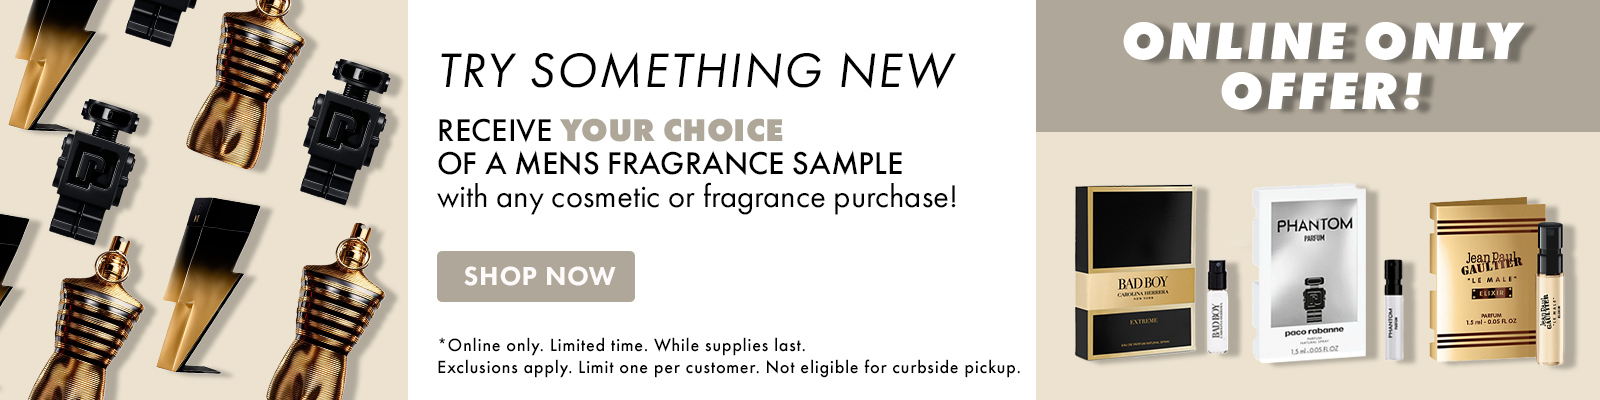 Your Choice of a men's fragrance sample with any cosmetic or fragrance purchase.